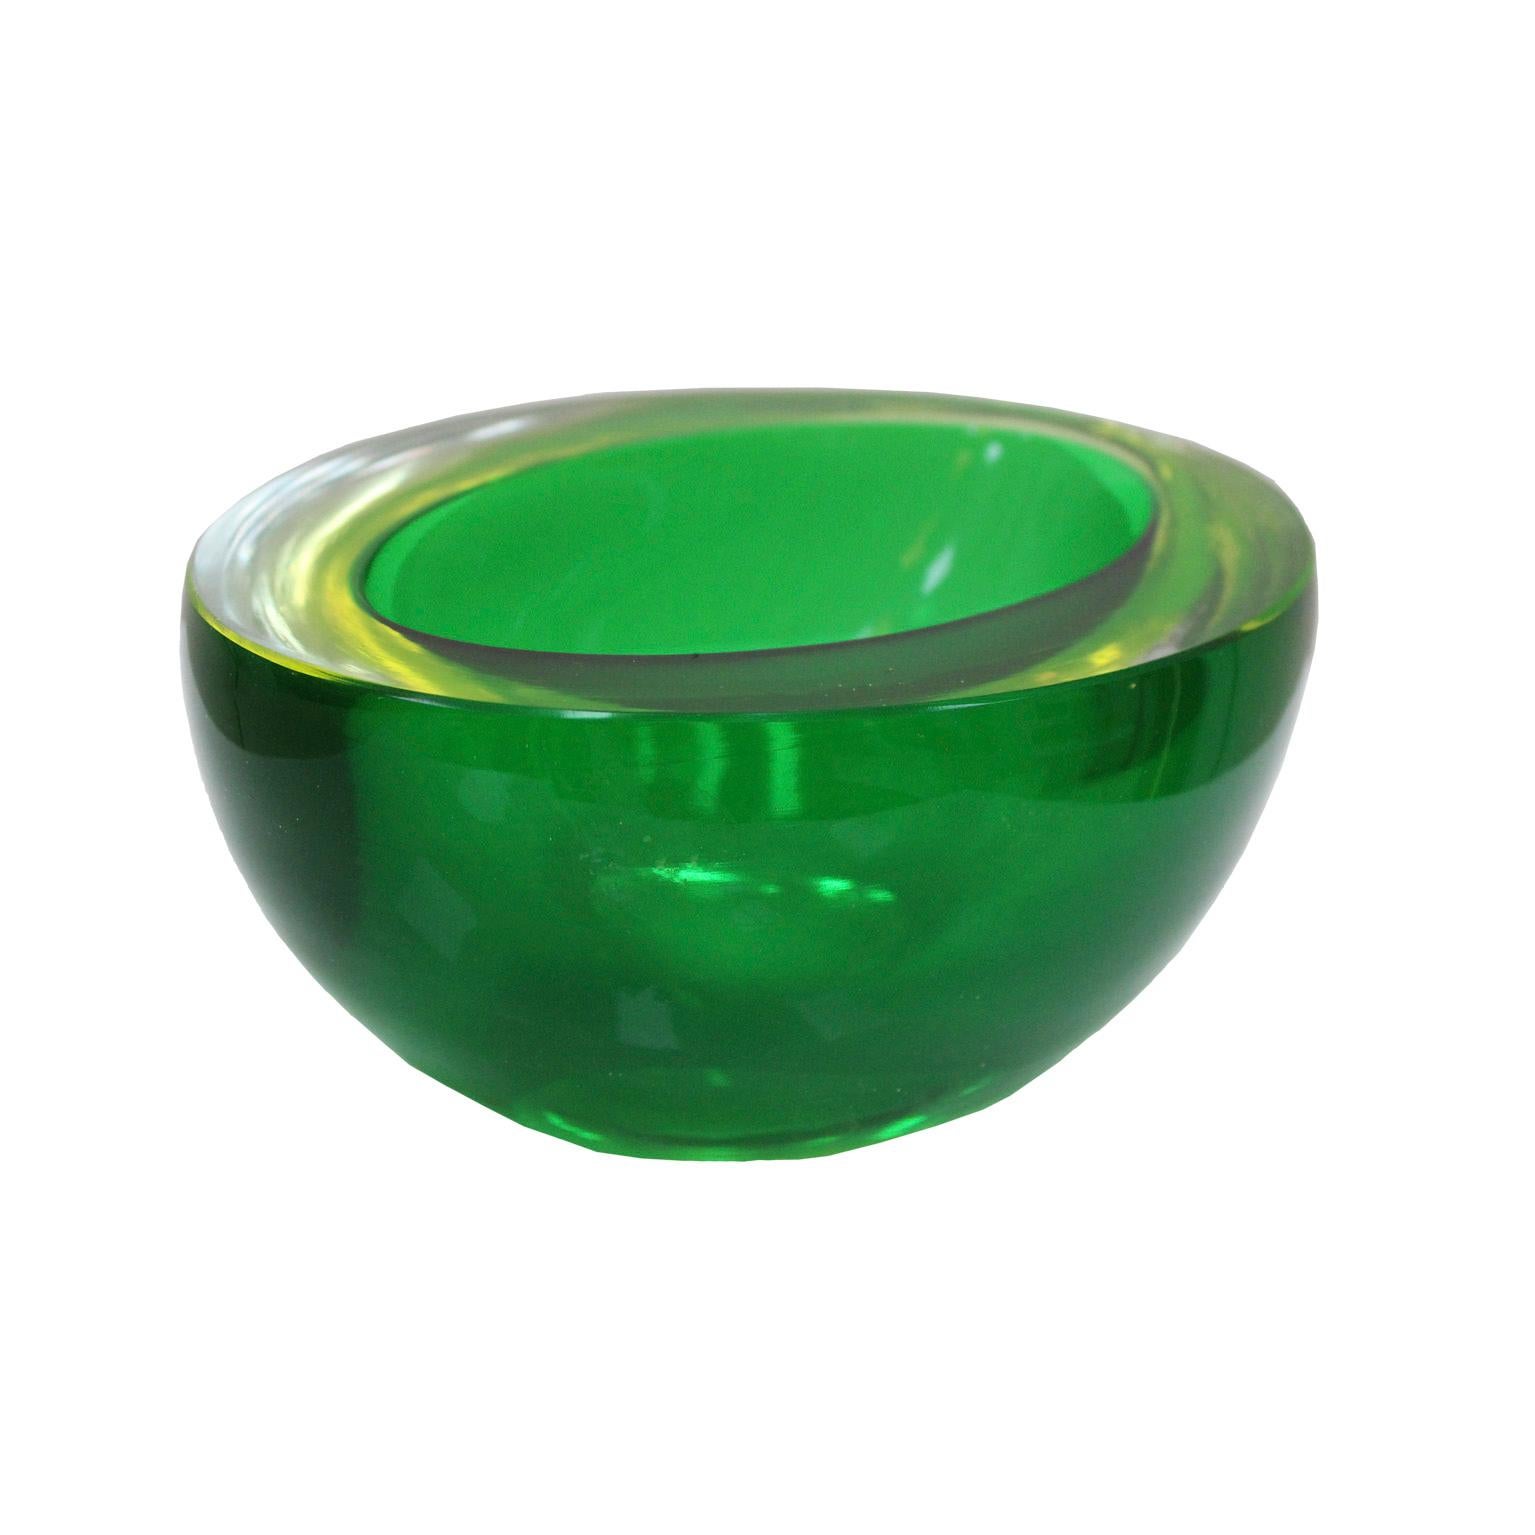 Mid-century Modern Glass bowl. Attributed to Flavio Poli for Seguso. Italy, 50s.
In sommerso glass, the green body is submerged in a green mass. (Color variant Verde)

Every item LA Studio offers is checked by our team of 10 craftsmen in our